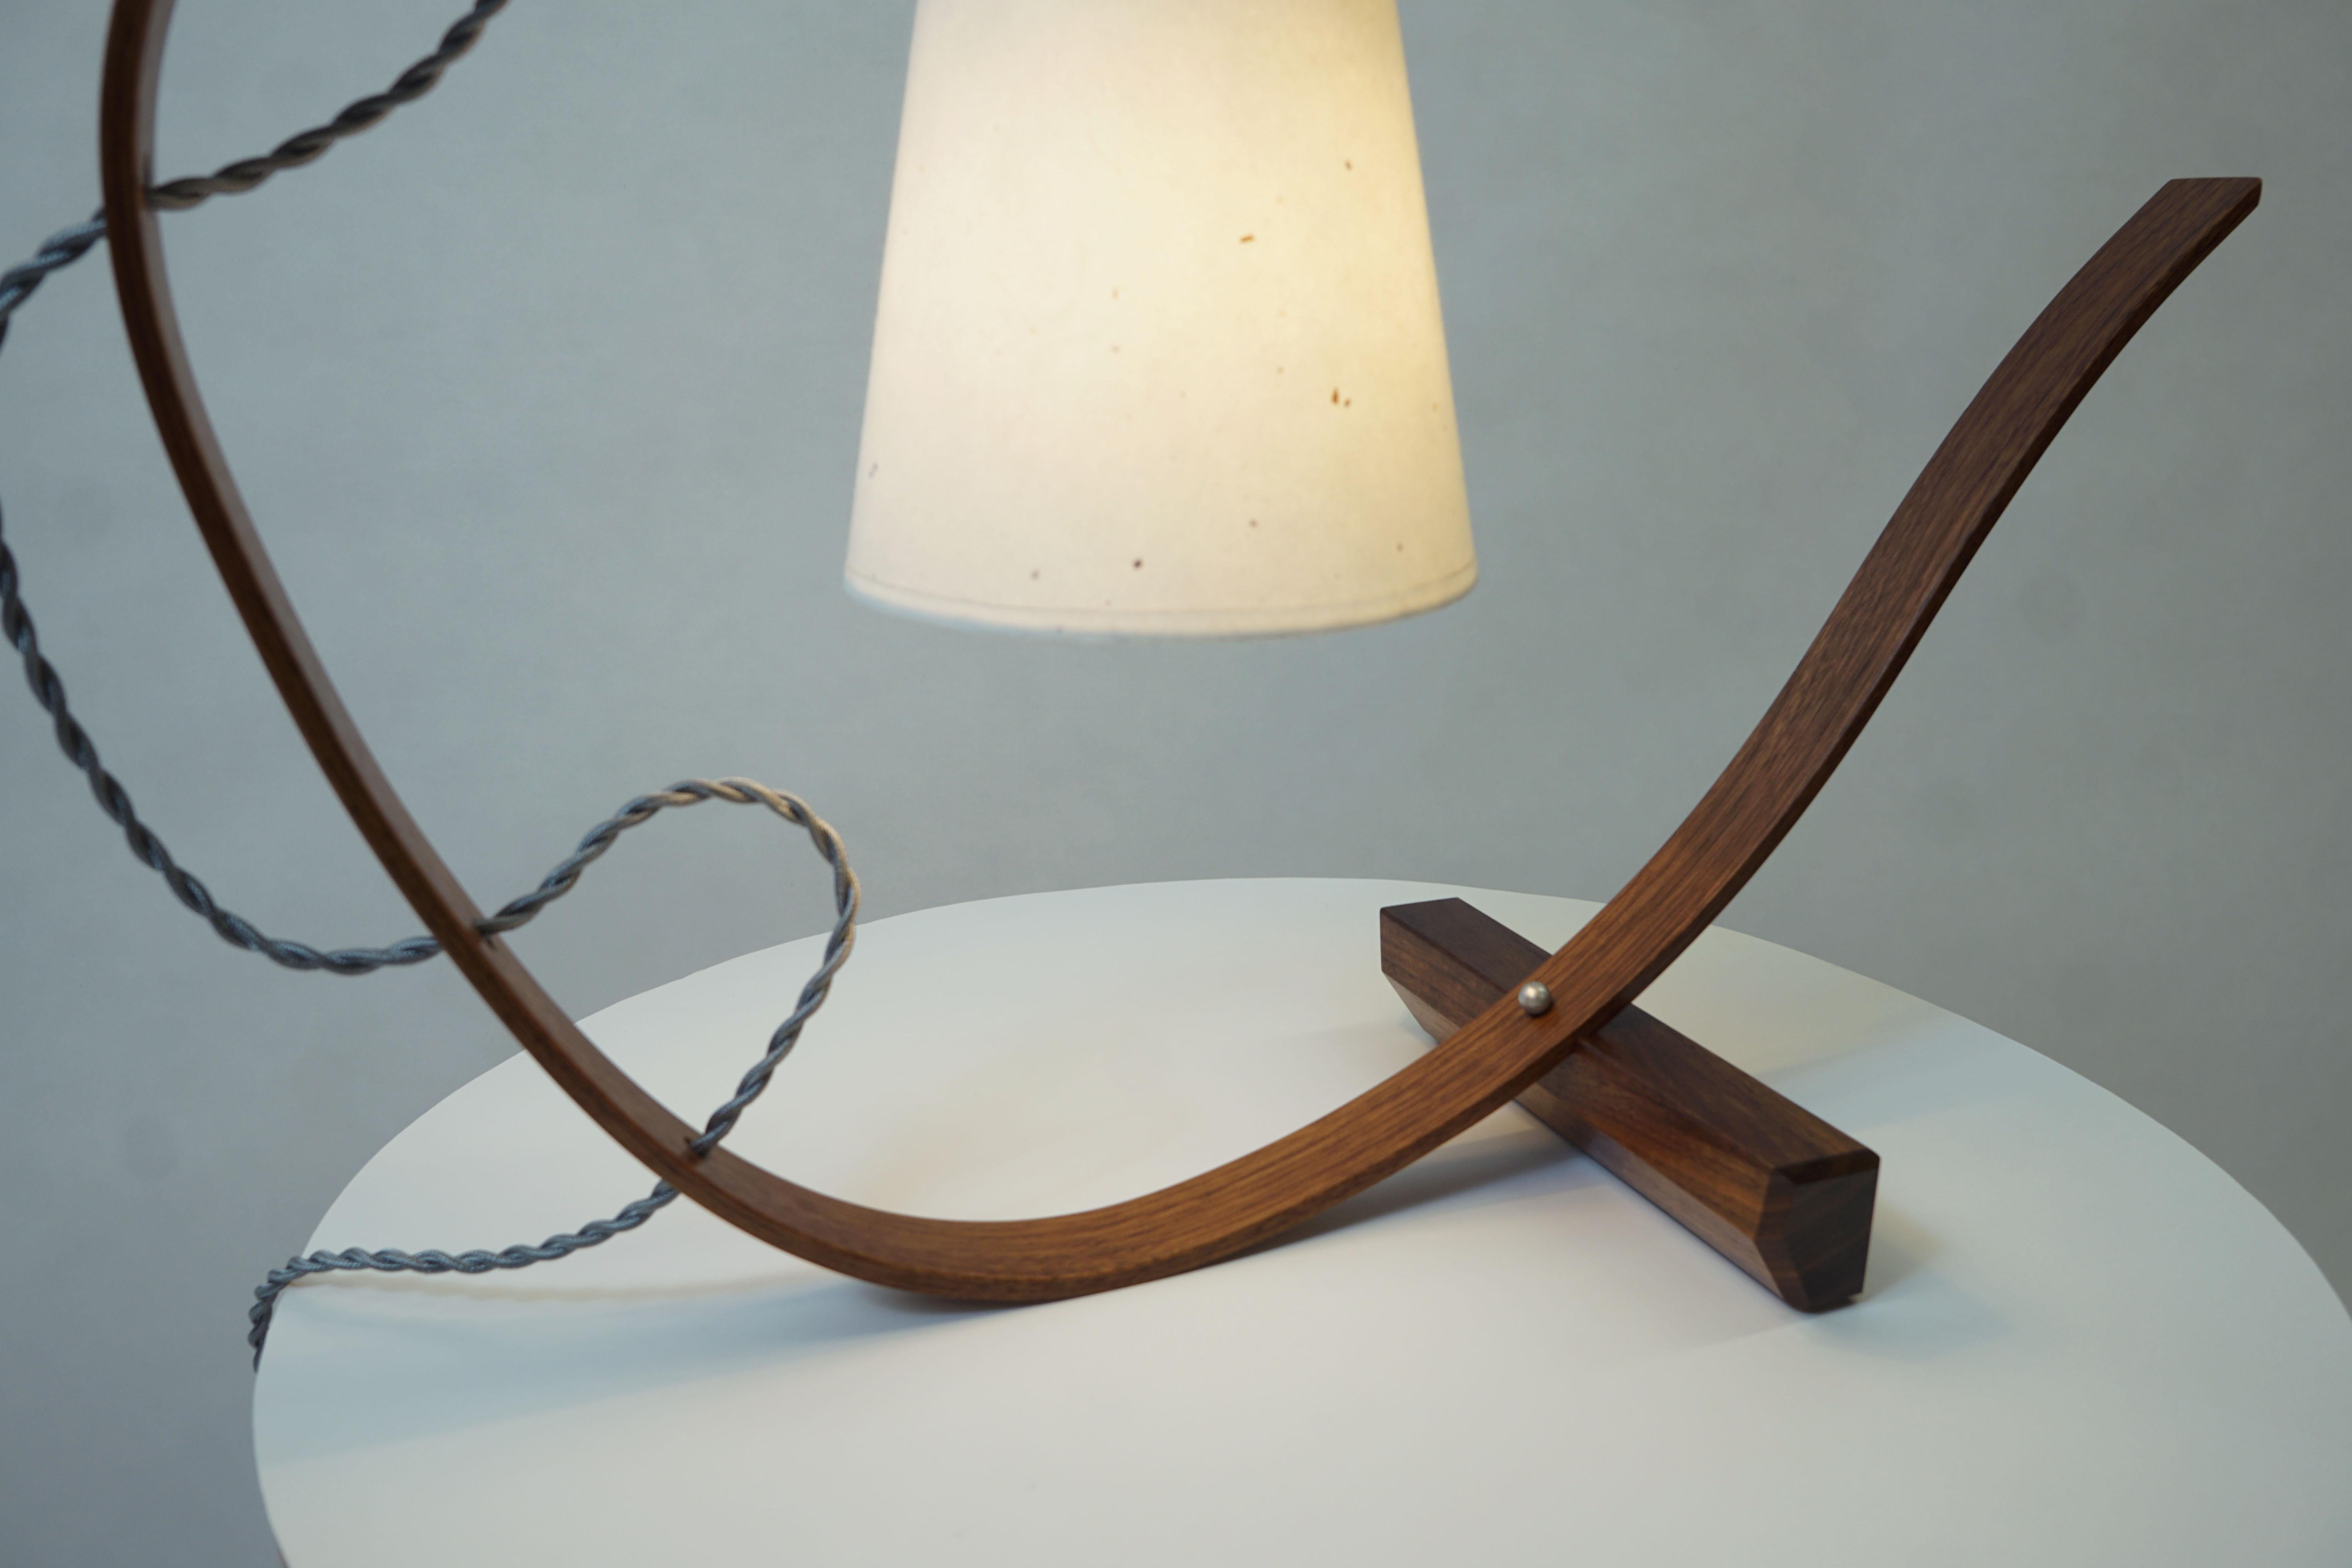 Scandinavian Modern Curved Table Lamp Sculpture, Handcrafted in Walnut Wood with Walnut Base For Sale